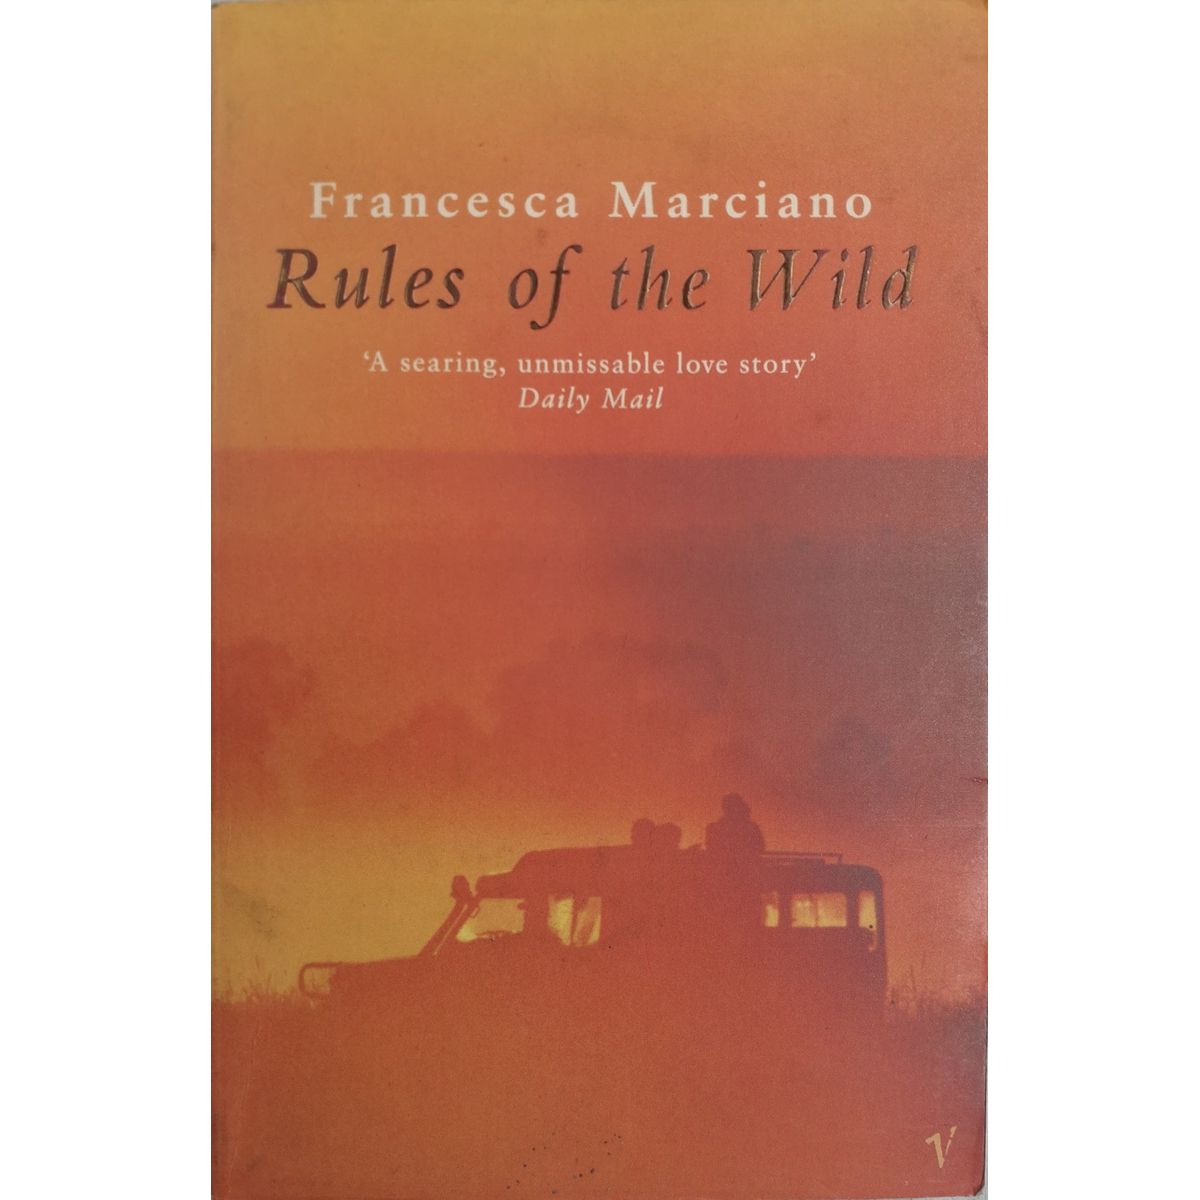 ISBN: 9780099274698 / 0099274698 - Rules of the Wild by Francesca Marciano [1999]